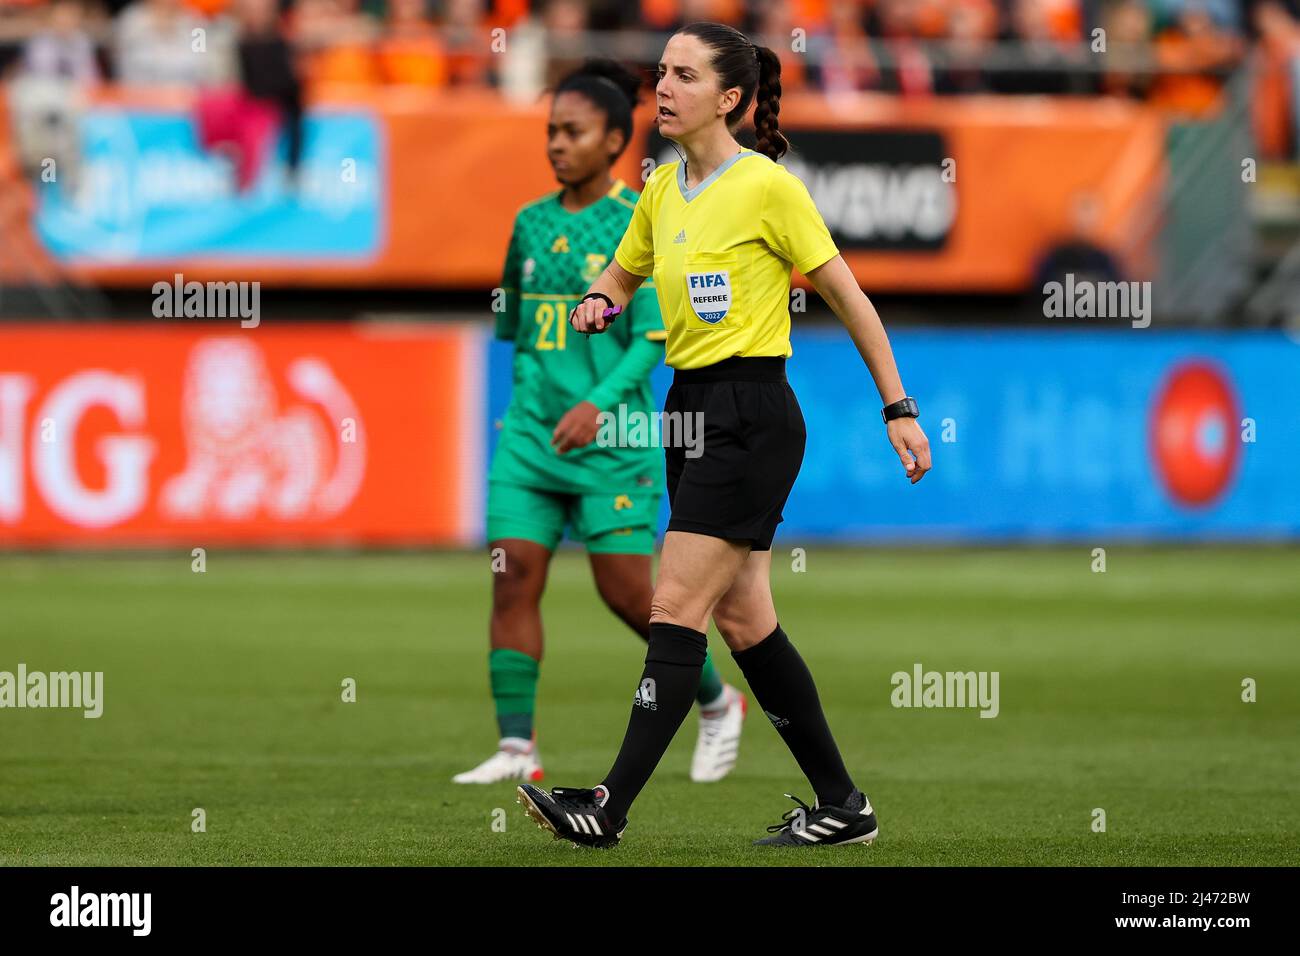 DEN HAAG, NETHERLANDS - APRIL 12: Referee Maria Dolores Martinez Madrona SPA during the Friendly match between The Netherlands Women and South Africa Women at Cars Jeans Stadion on April 12, 2022 in Den Haag, Netherlands (Photo by Hans van der Valk/Orange Pictures) Stock Photo